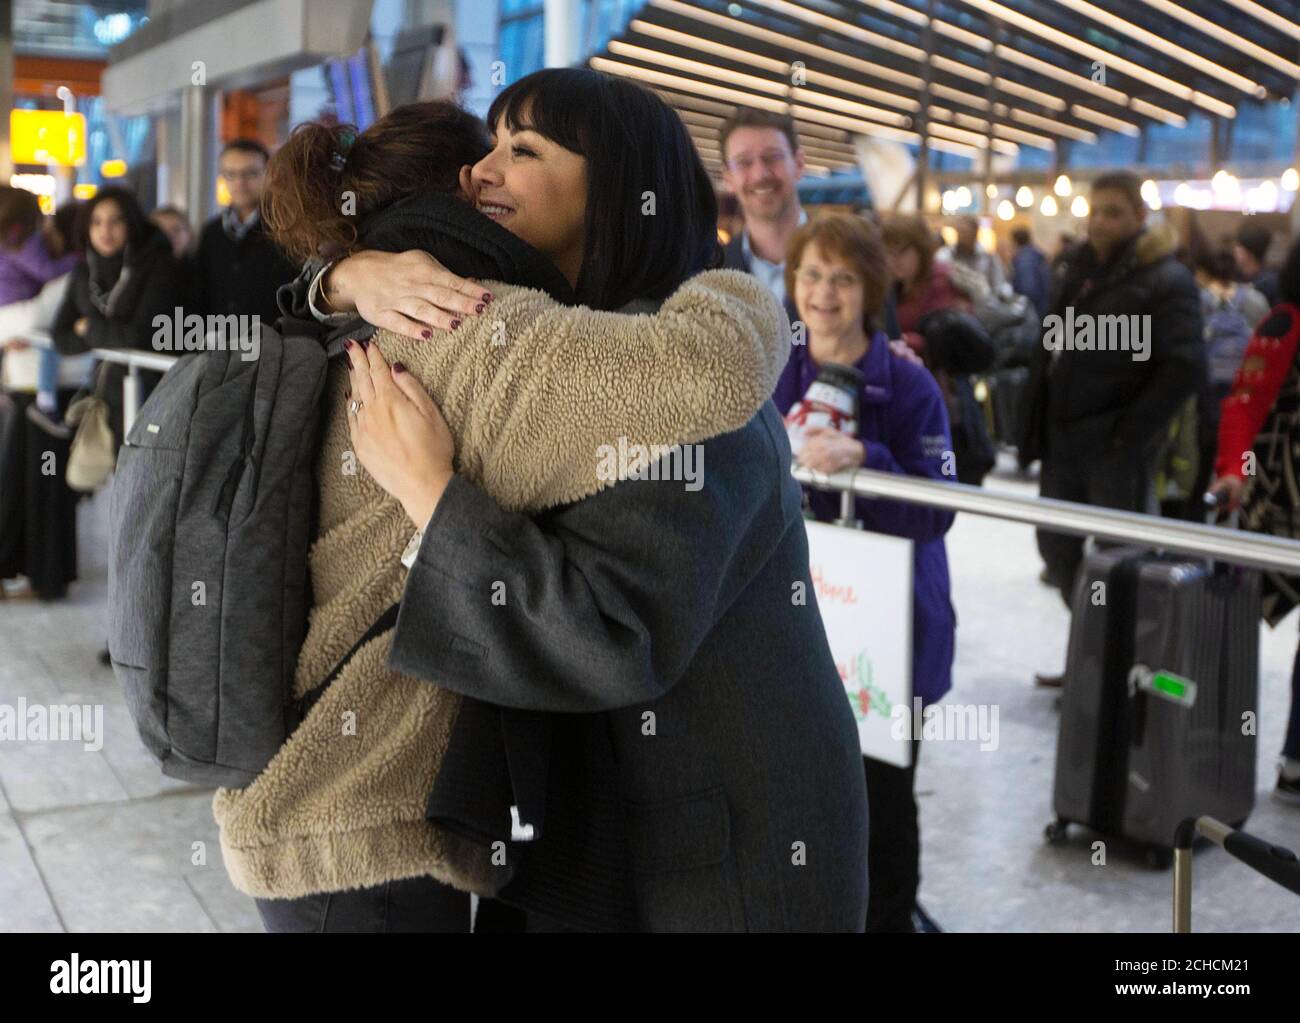 EDITORIAL USE ONLY Martine McCutcheon (right) joins volunteers at Heathrow Airport to welcome home passengers for Christmas with their own ÔLove ActuallyÕ moment, ahead of the airportÕs busiest week for arrivals, Middlesex. PRESS ASSOCIATION. Photo. Picture date: Tuesday December 19, 2017. Family and friends can direct message @Heathrowairport on Twitter to arrange for a loved one to have a personalised welcome when they arrive into the airport if they canÕt be there in person this Christmas. Photo credit should read: David Parry/PA Wire  Stock Photo